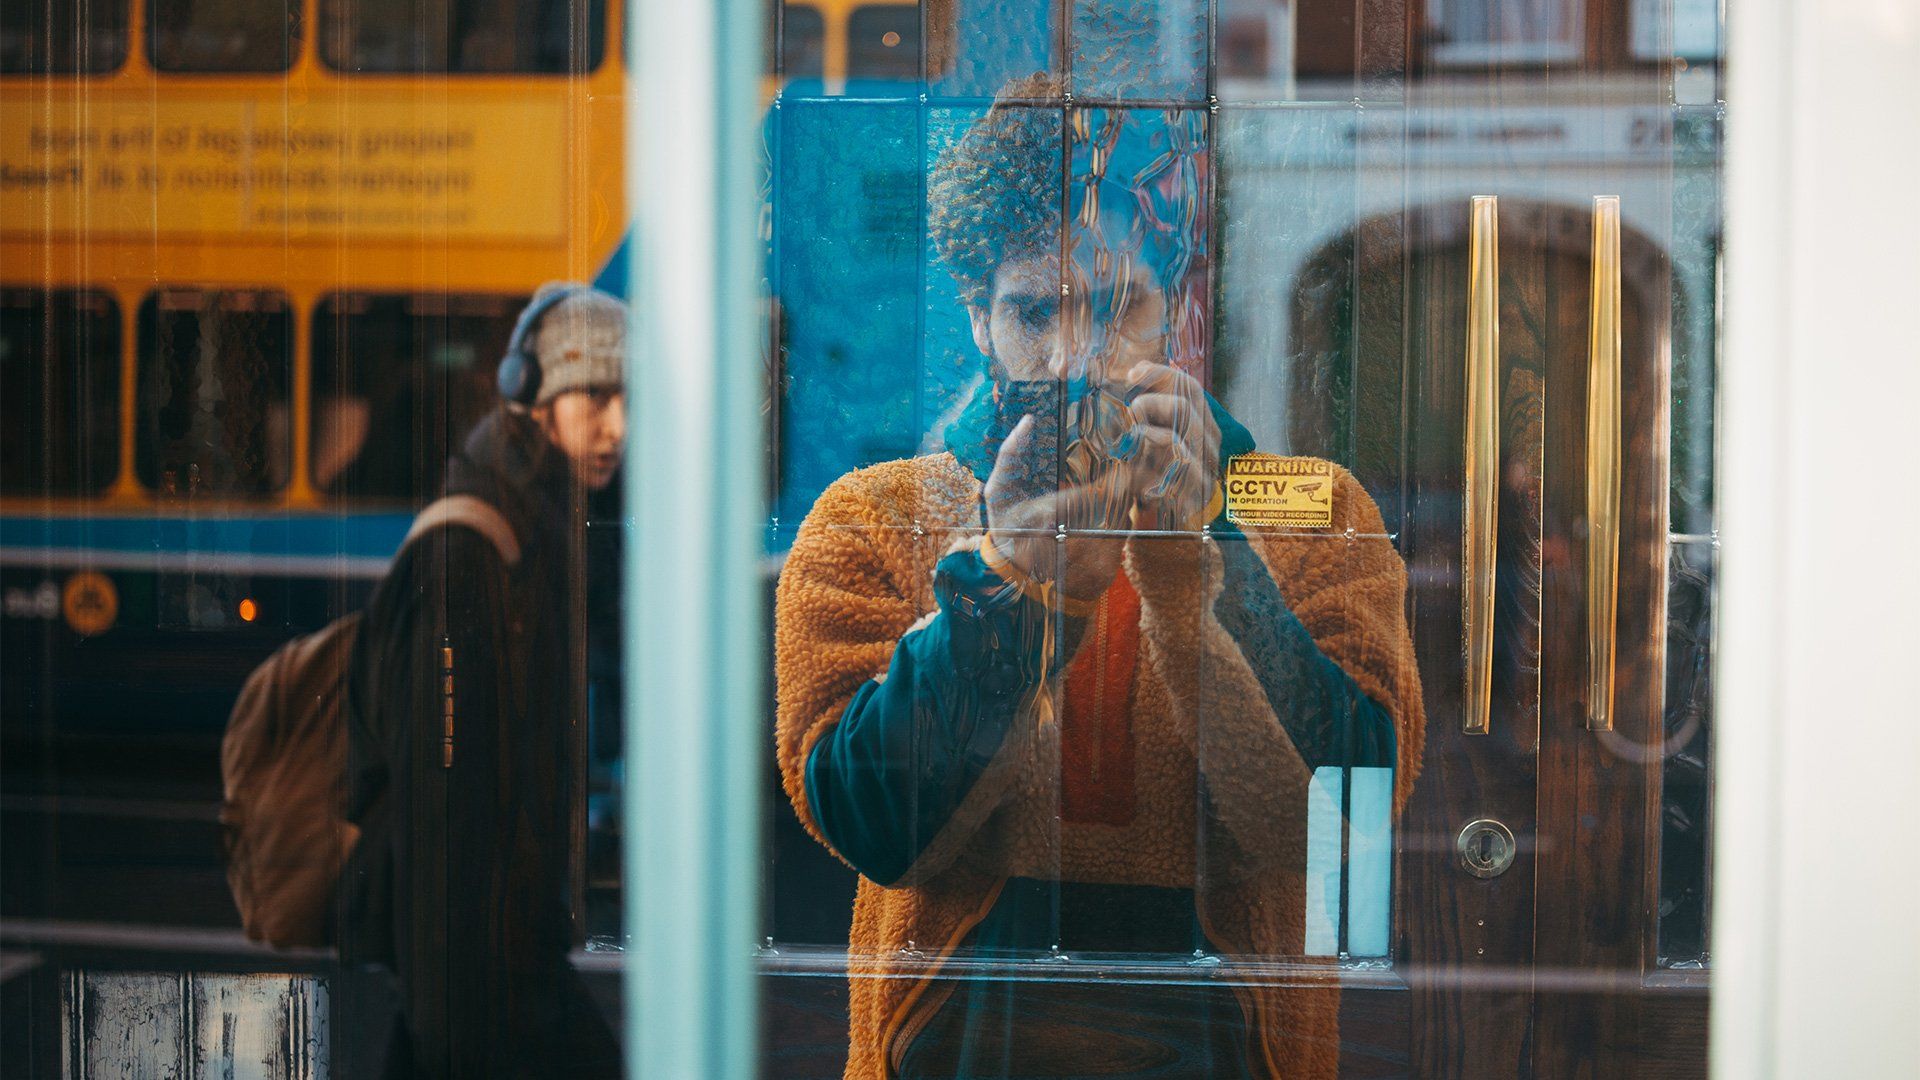 Giuseppe taking a photo of a shop window, showing passers by in the reflection.